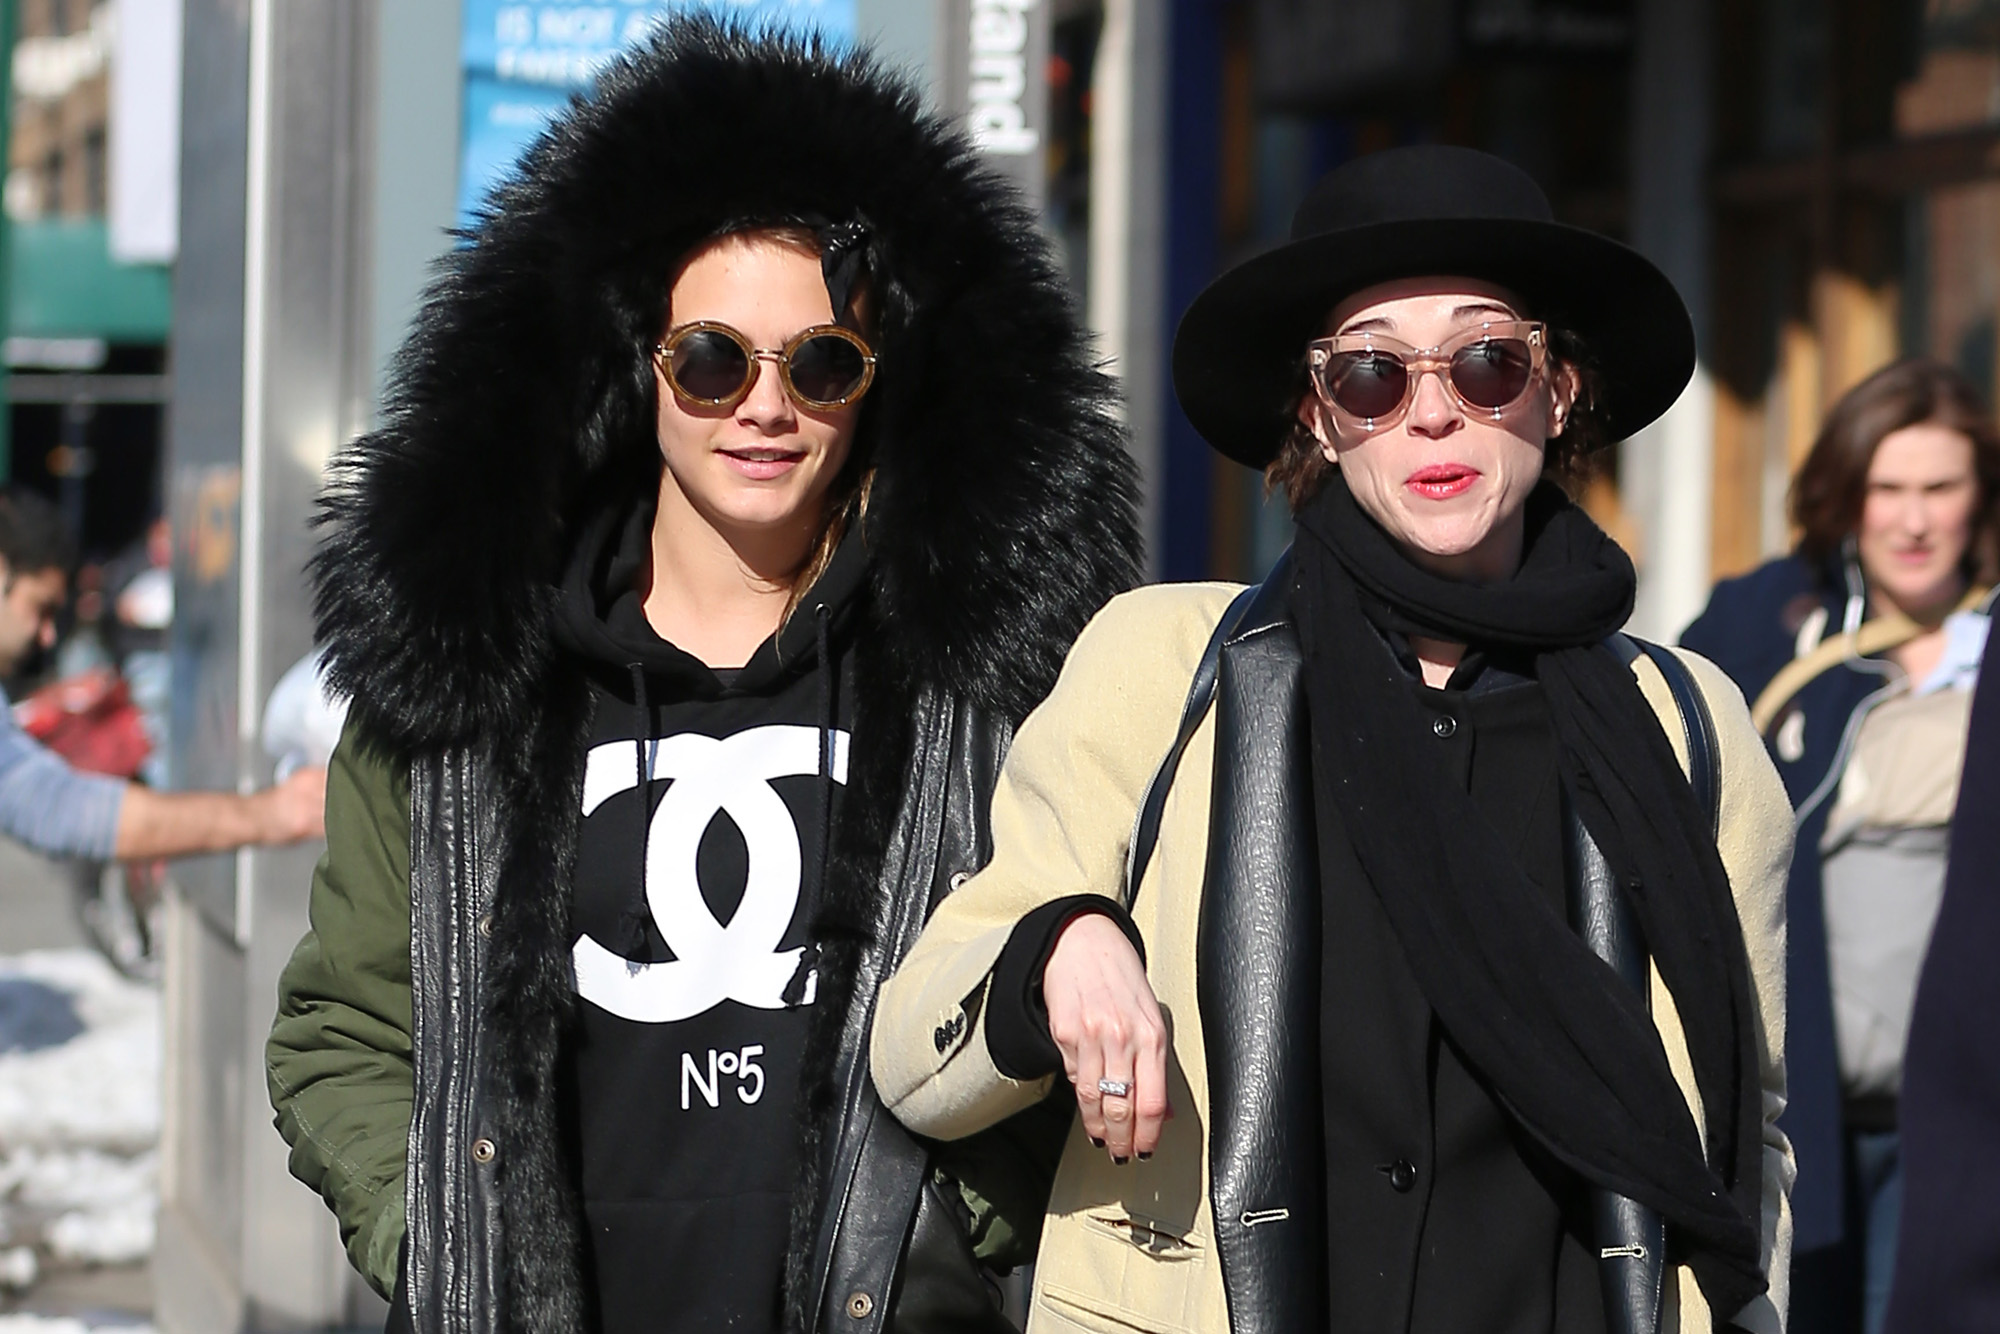 ***MANDATORY BYLINE TO READ INFPhoto.com ONLY*** Cara Delevingne and singer St. Vincent, aka Annie Clark, hang out together in downtown New York City. The pair are rumored to be dating after they were reportedly spotted kissing at a BRIT Awards after party last week  Pictured: Cara Delevingne, St. Vincent Ref: SPL965827 020315  Picture by: INFphoto.com 